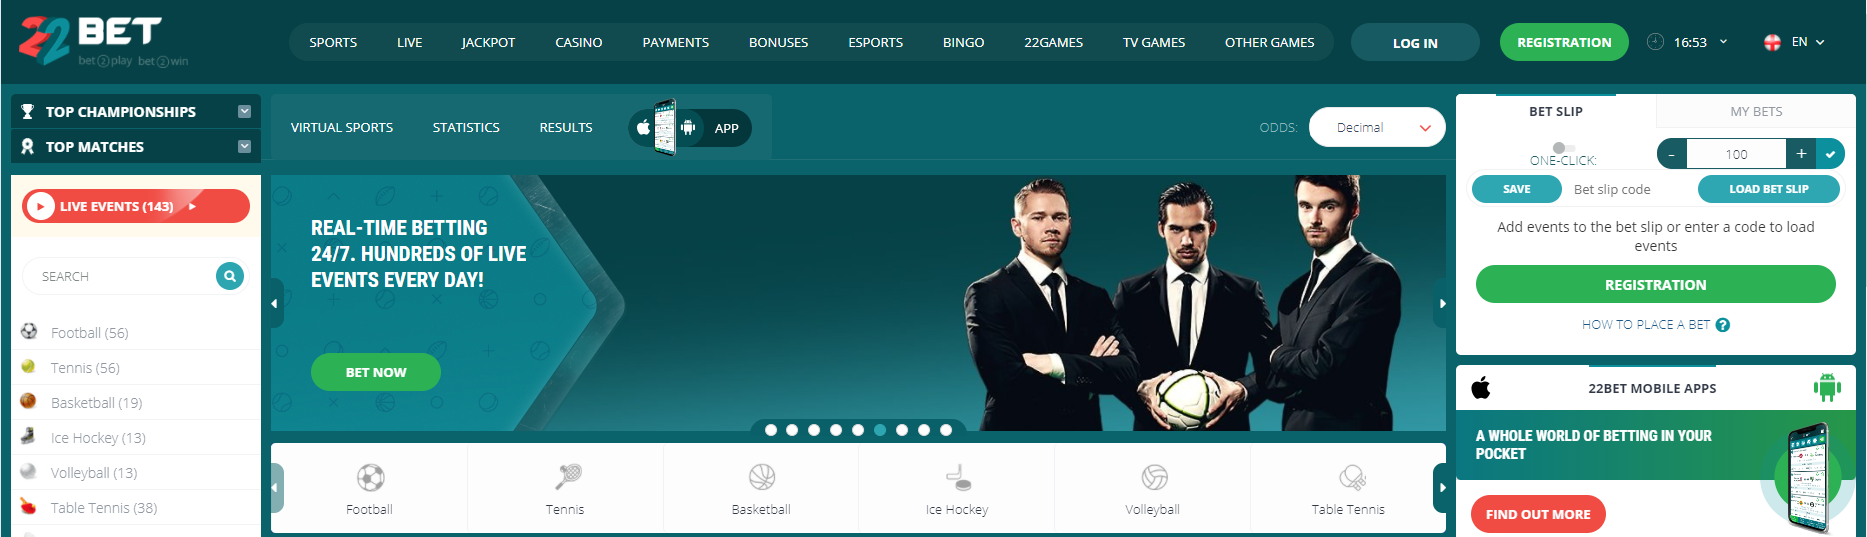 How to register on 22Bet